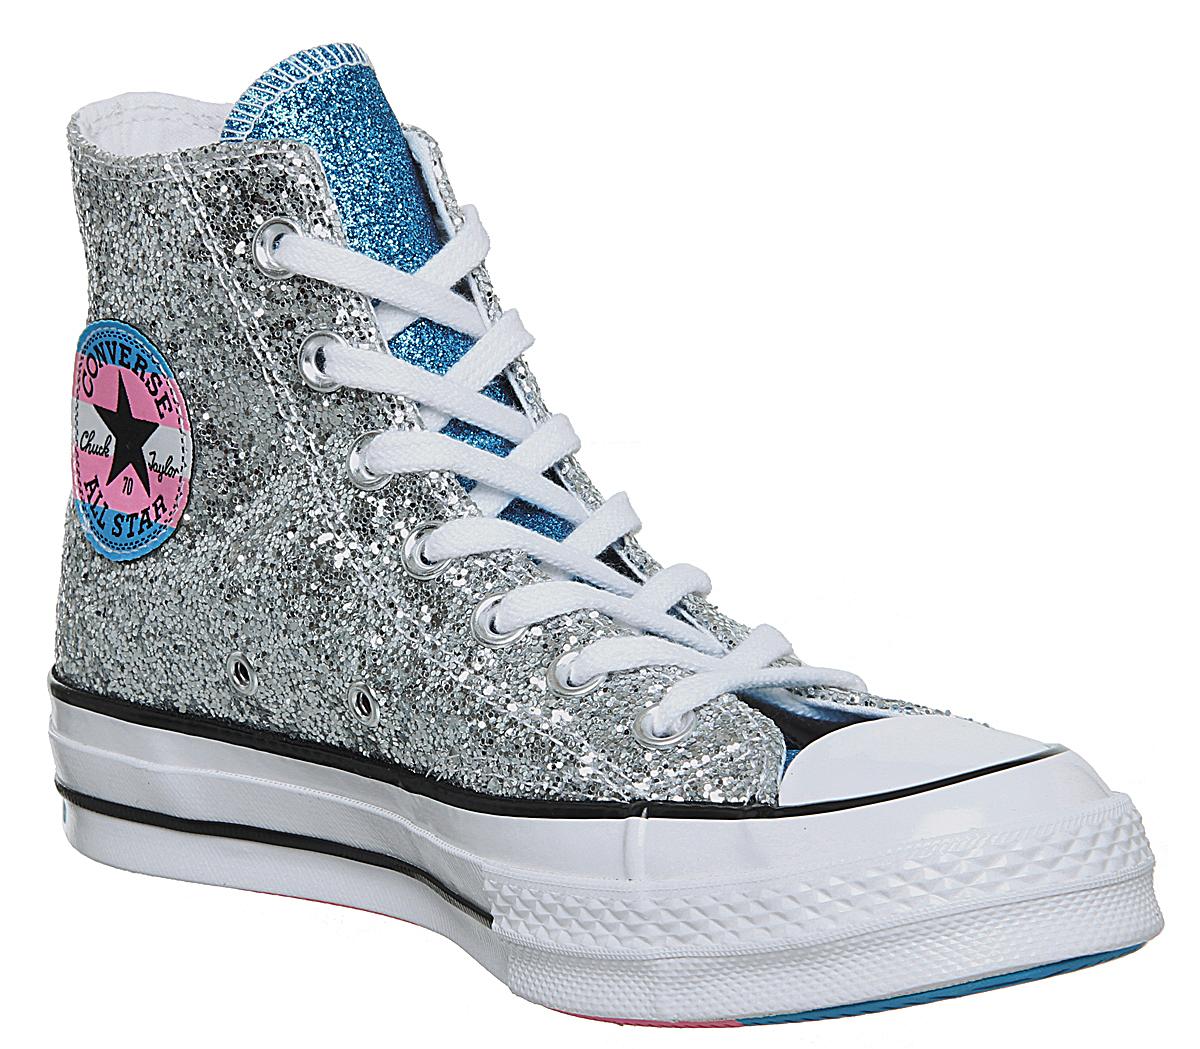 converse all star sequin high top trainers